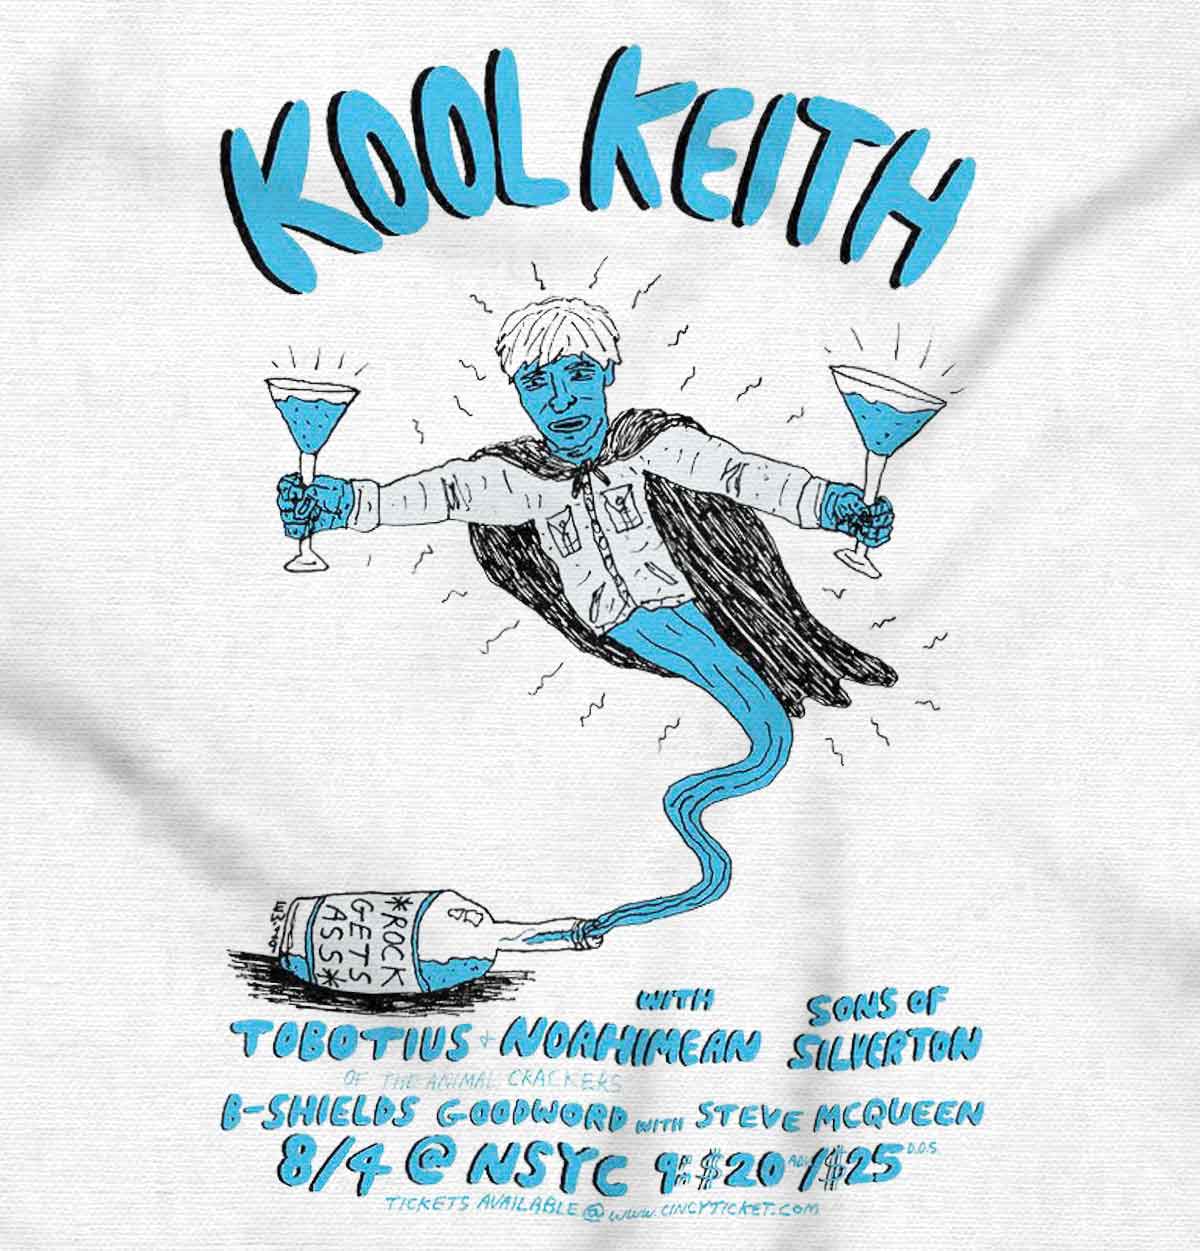 This picture shows Kool Keith, in the form of a genie, a famous Hip-Hop artist who brings happiness and the magic of music.